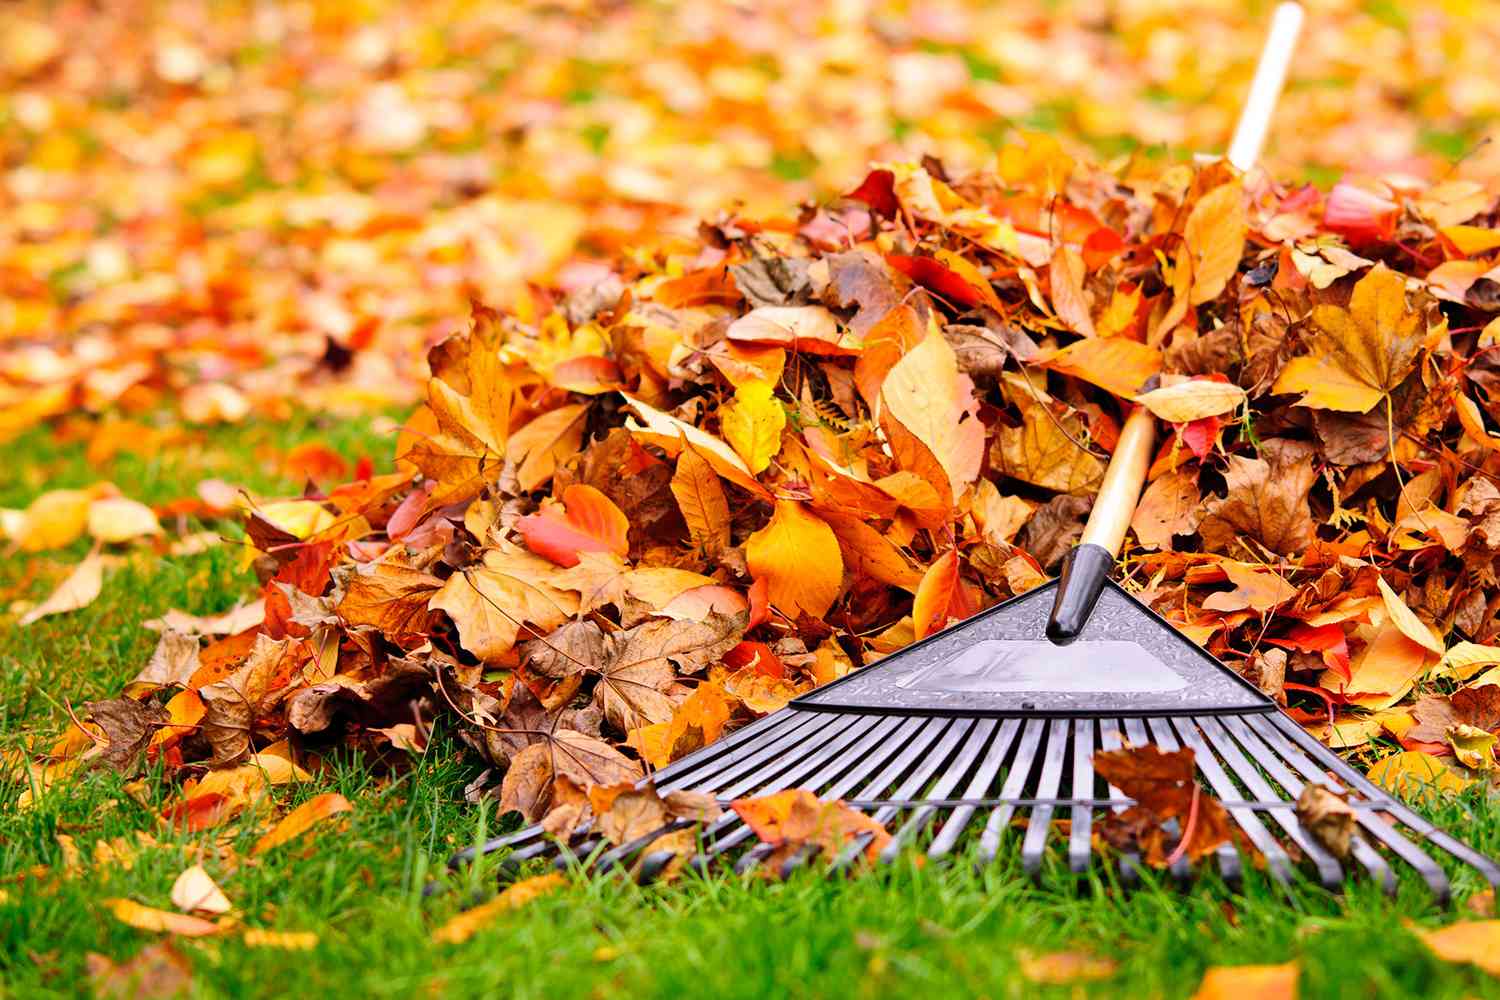 pile of orange, red and yellow fall leaves in front yard with garden rake